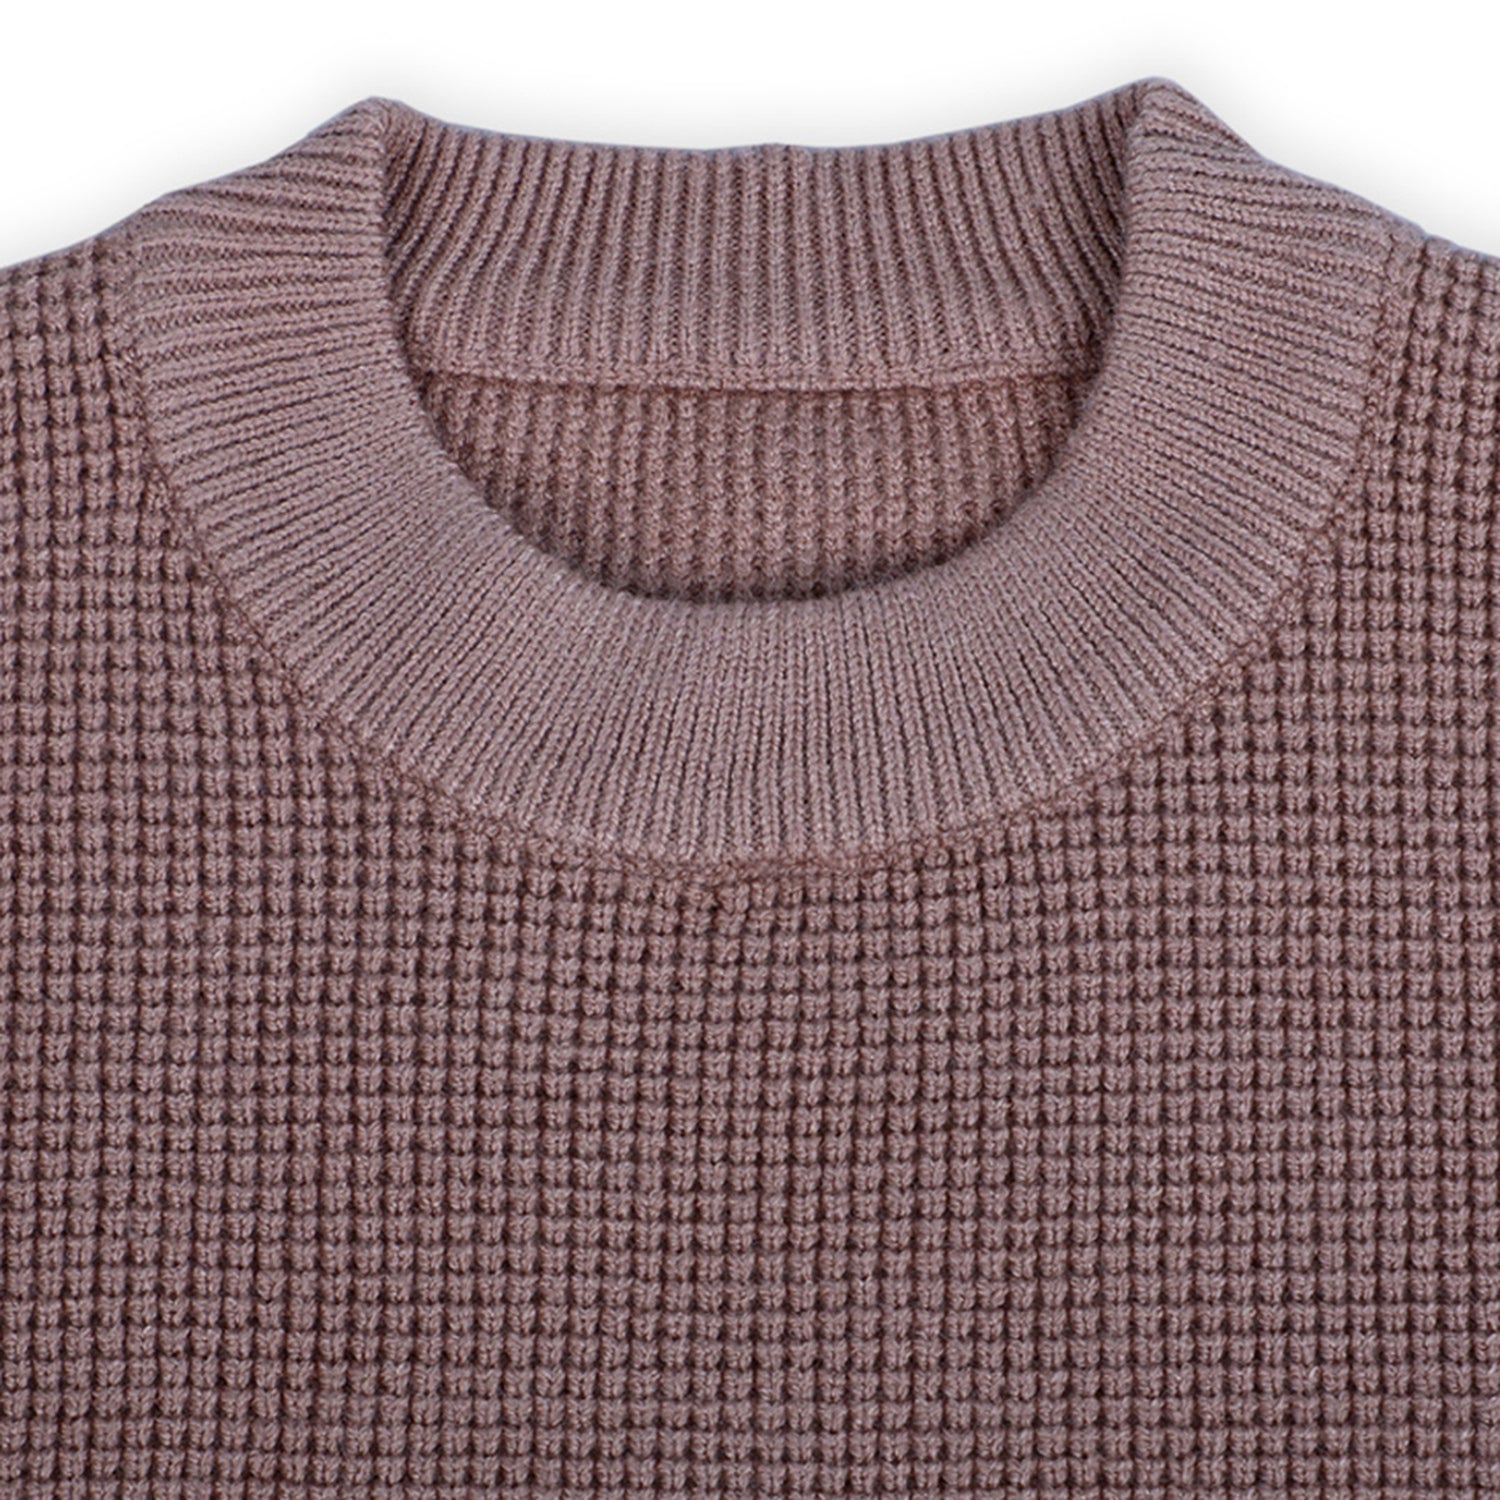 3D Neck Tie Premium Full Sleeves Knitted Sweater - Brown